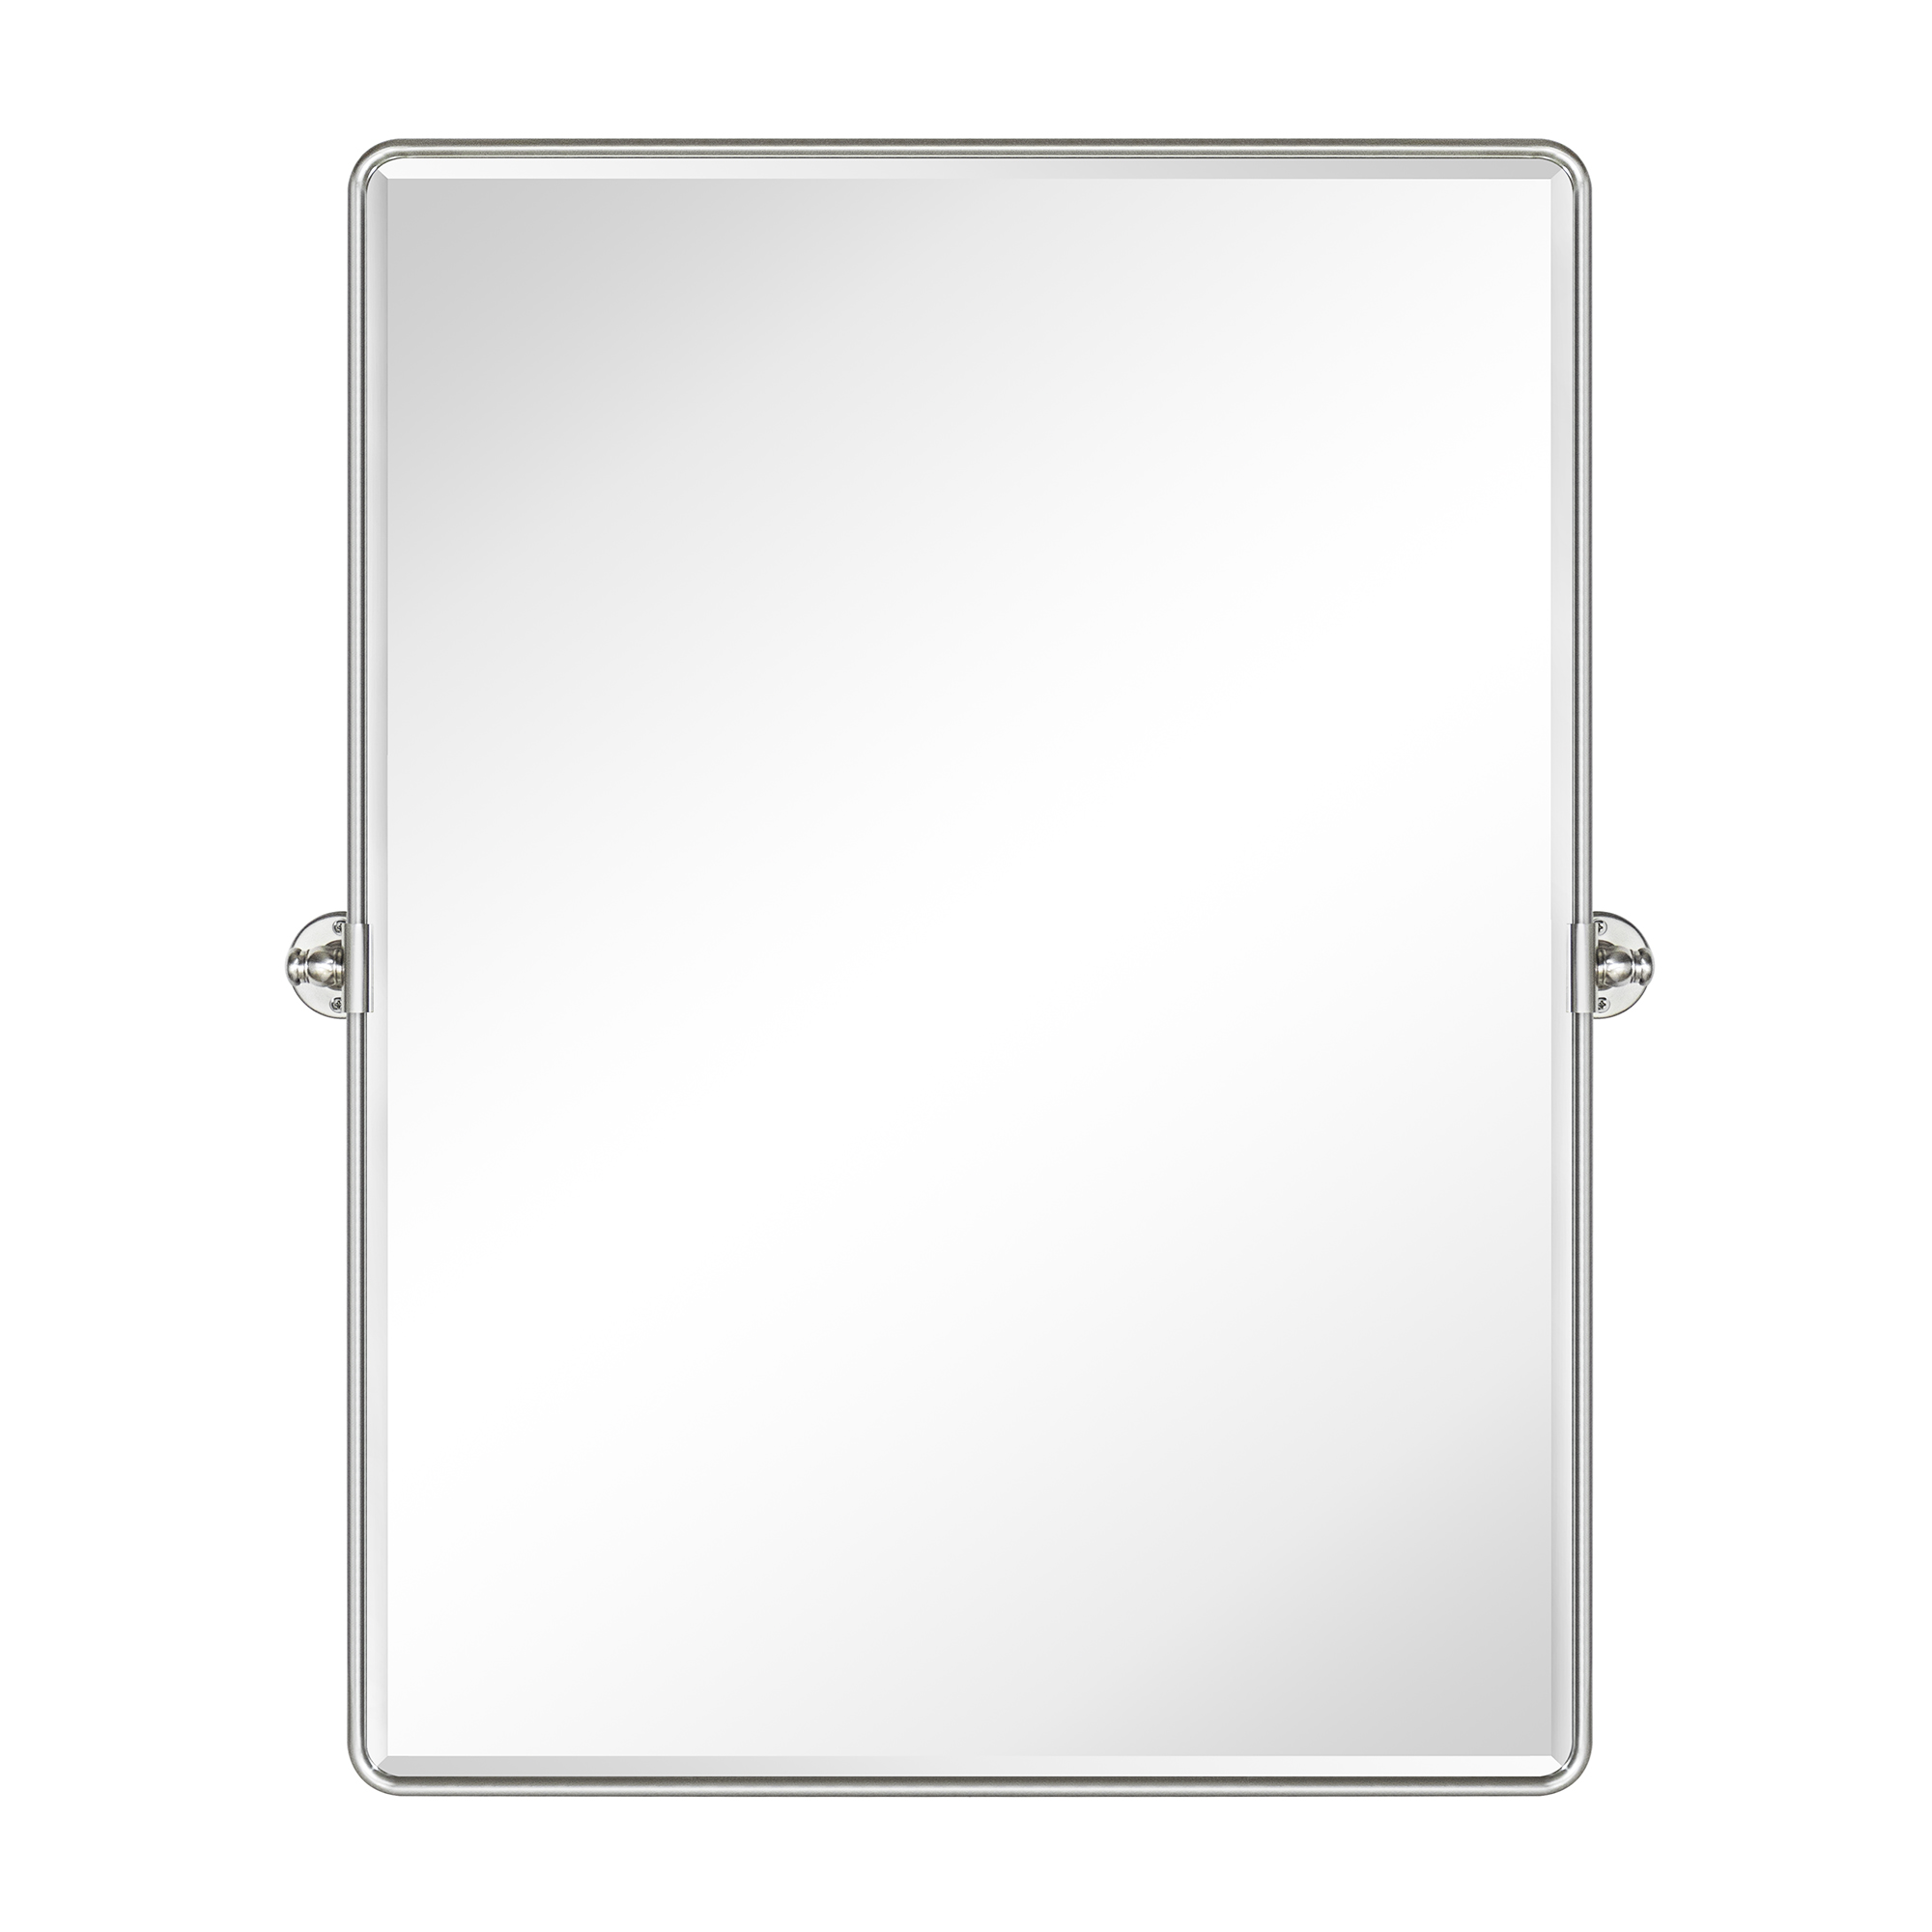 Woodvale Rectangle Metal Wall Mirror-30x40-Brushed Nickel